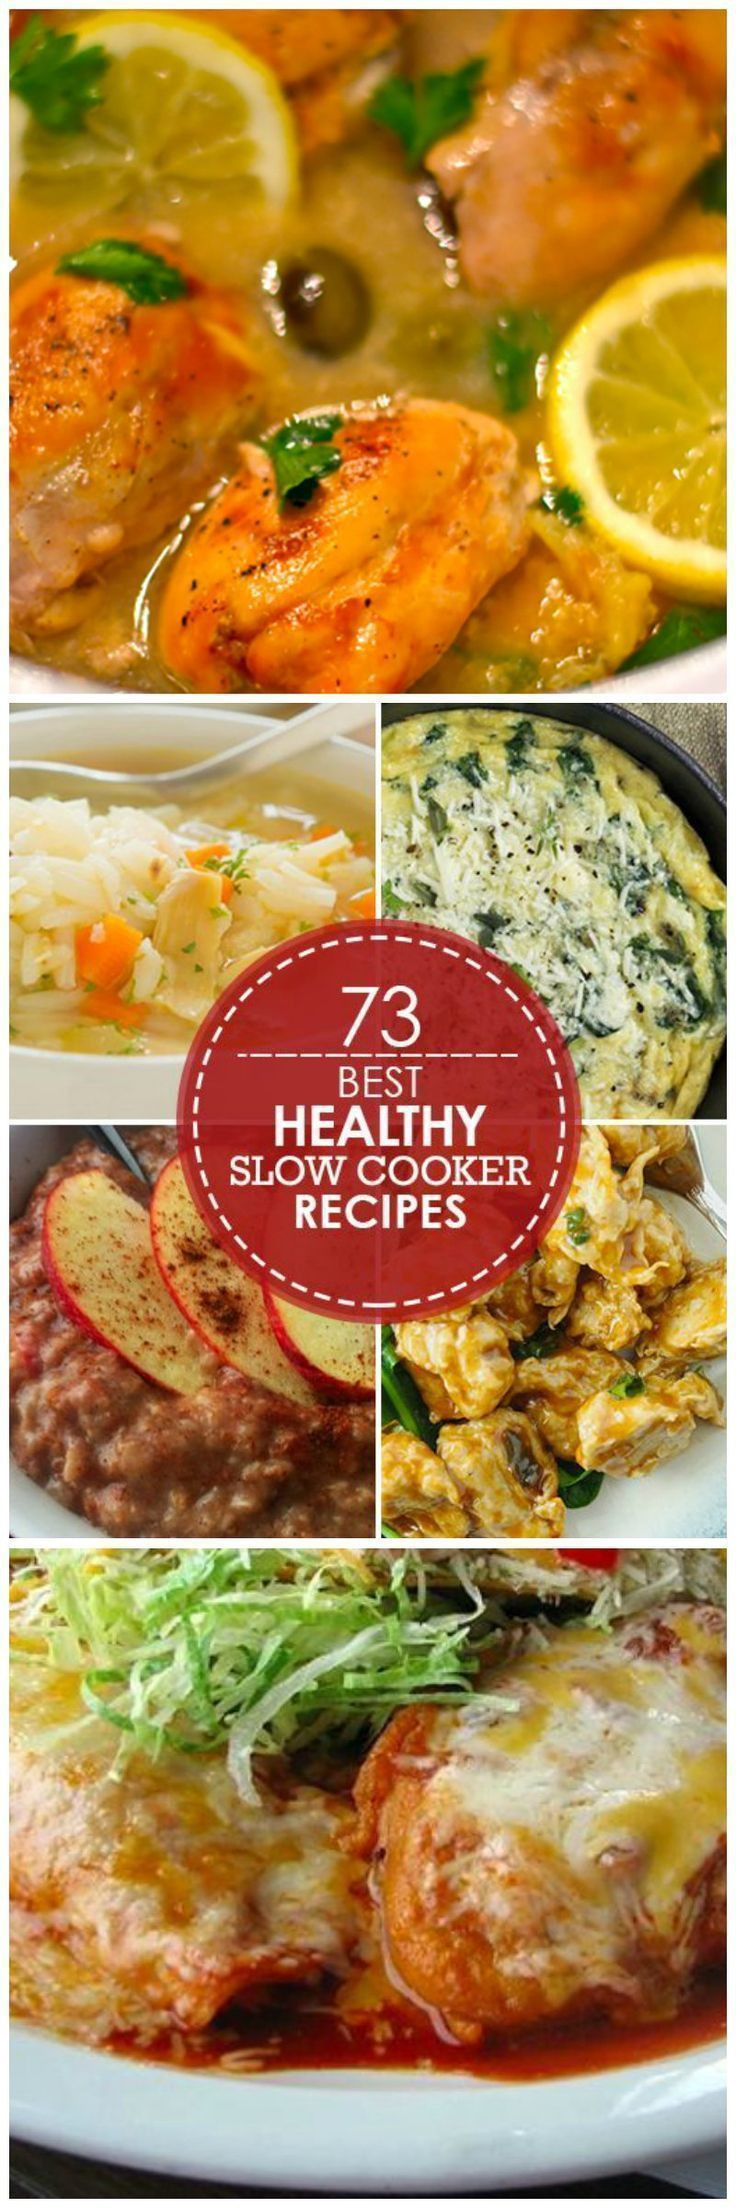 Healthy Slow Cooker Recipes
 1000 images about Skinny Slow Cooker on Pinterest